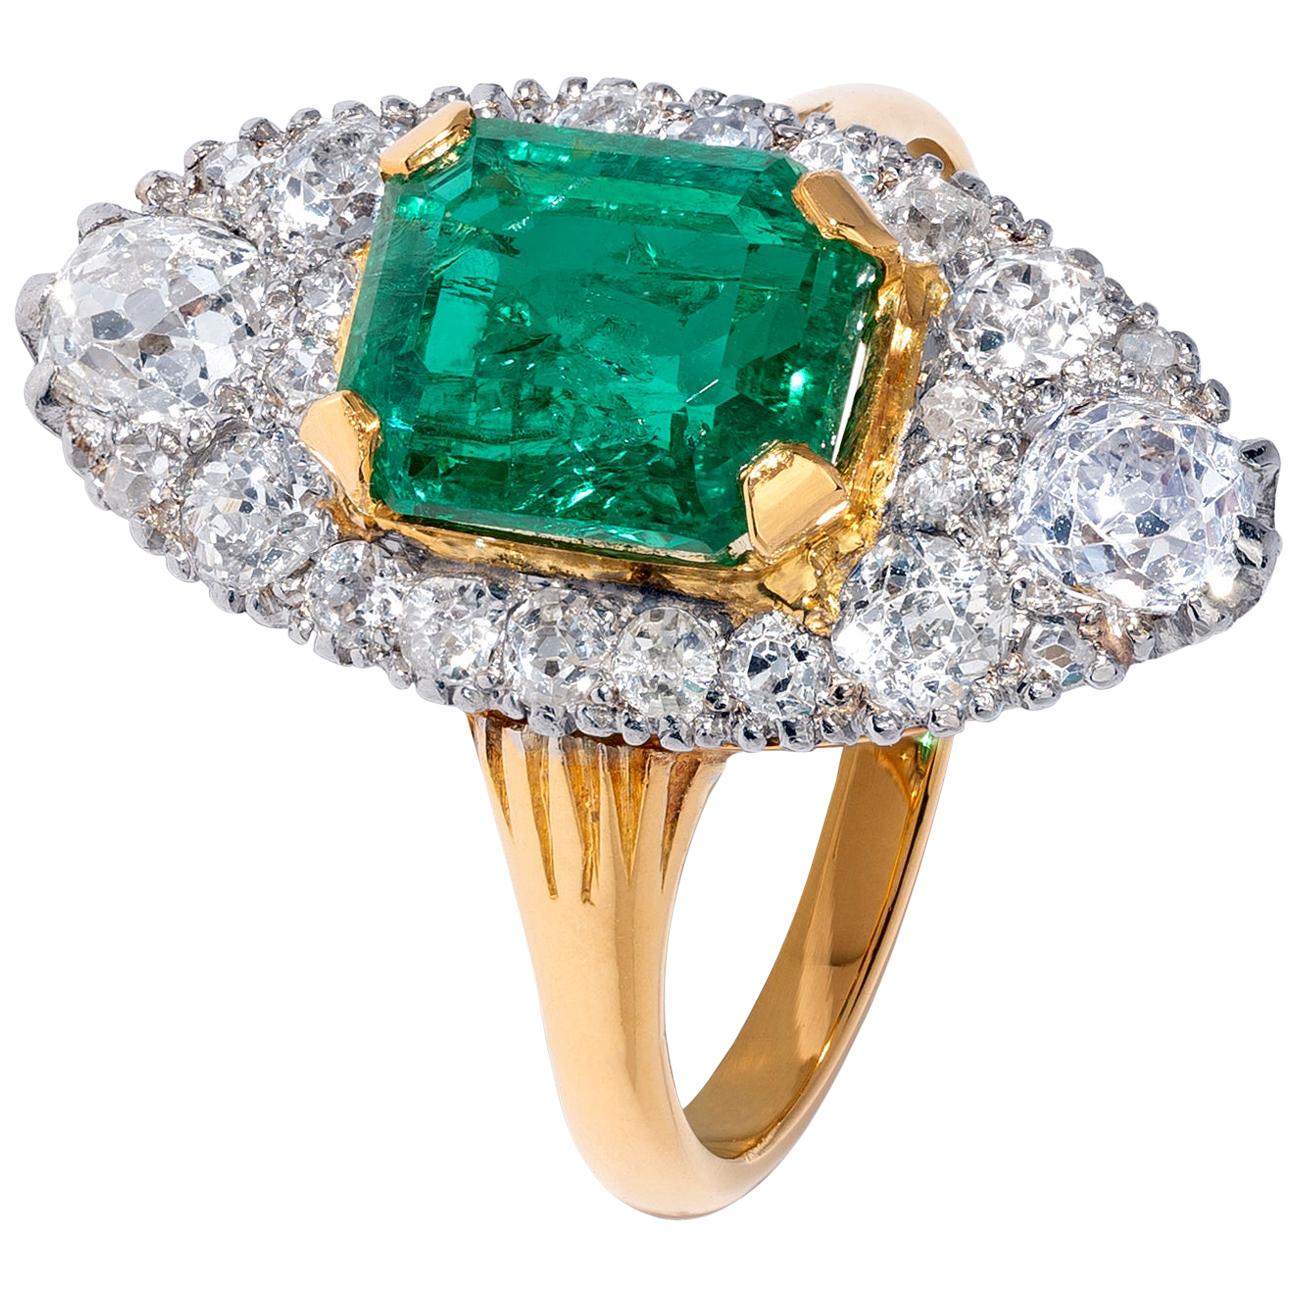 Unique Yellow Gold 2.49 Carat Emerald Ring with White Diamonds For Sale ...